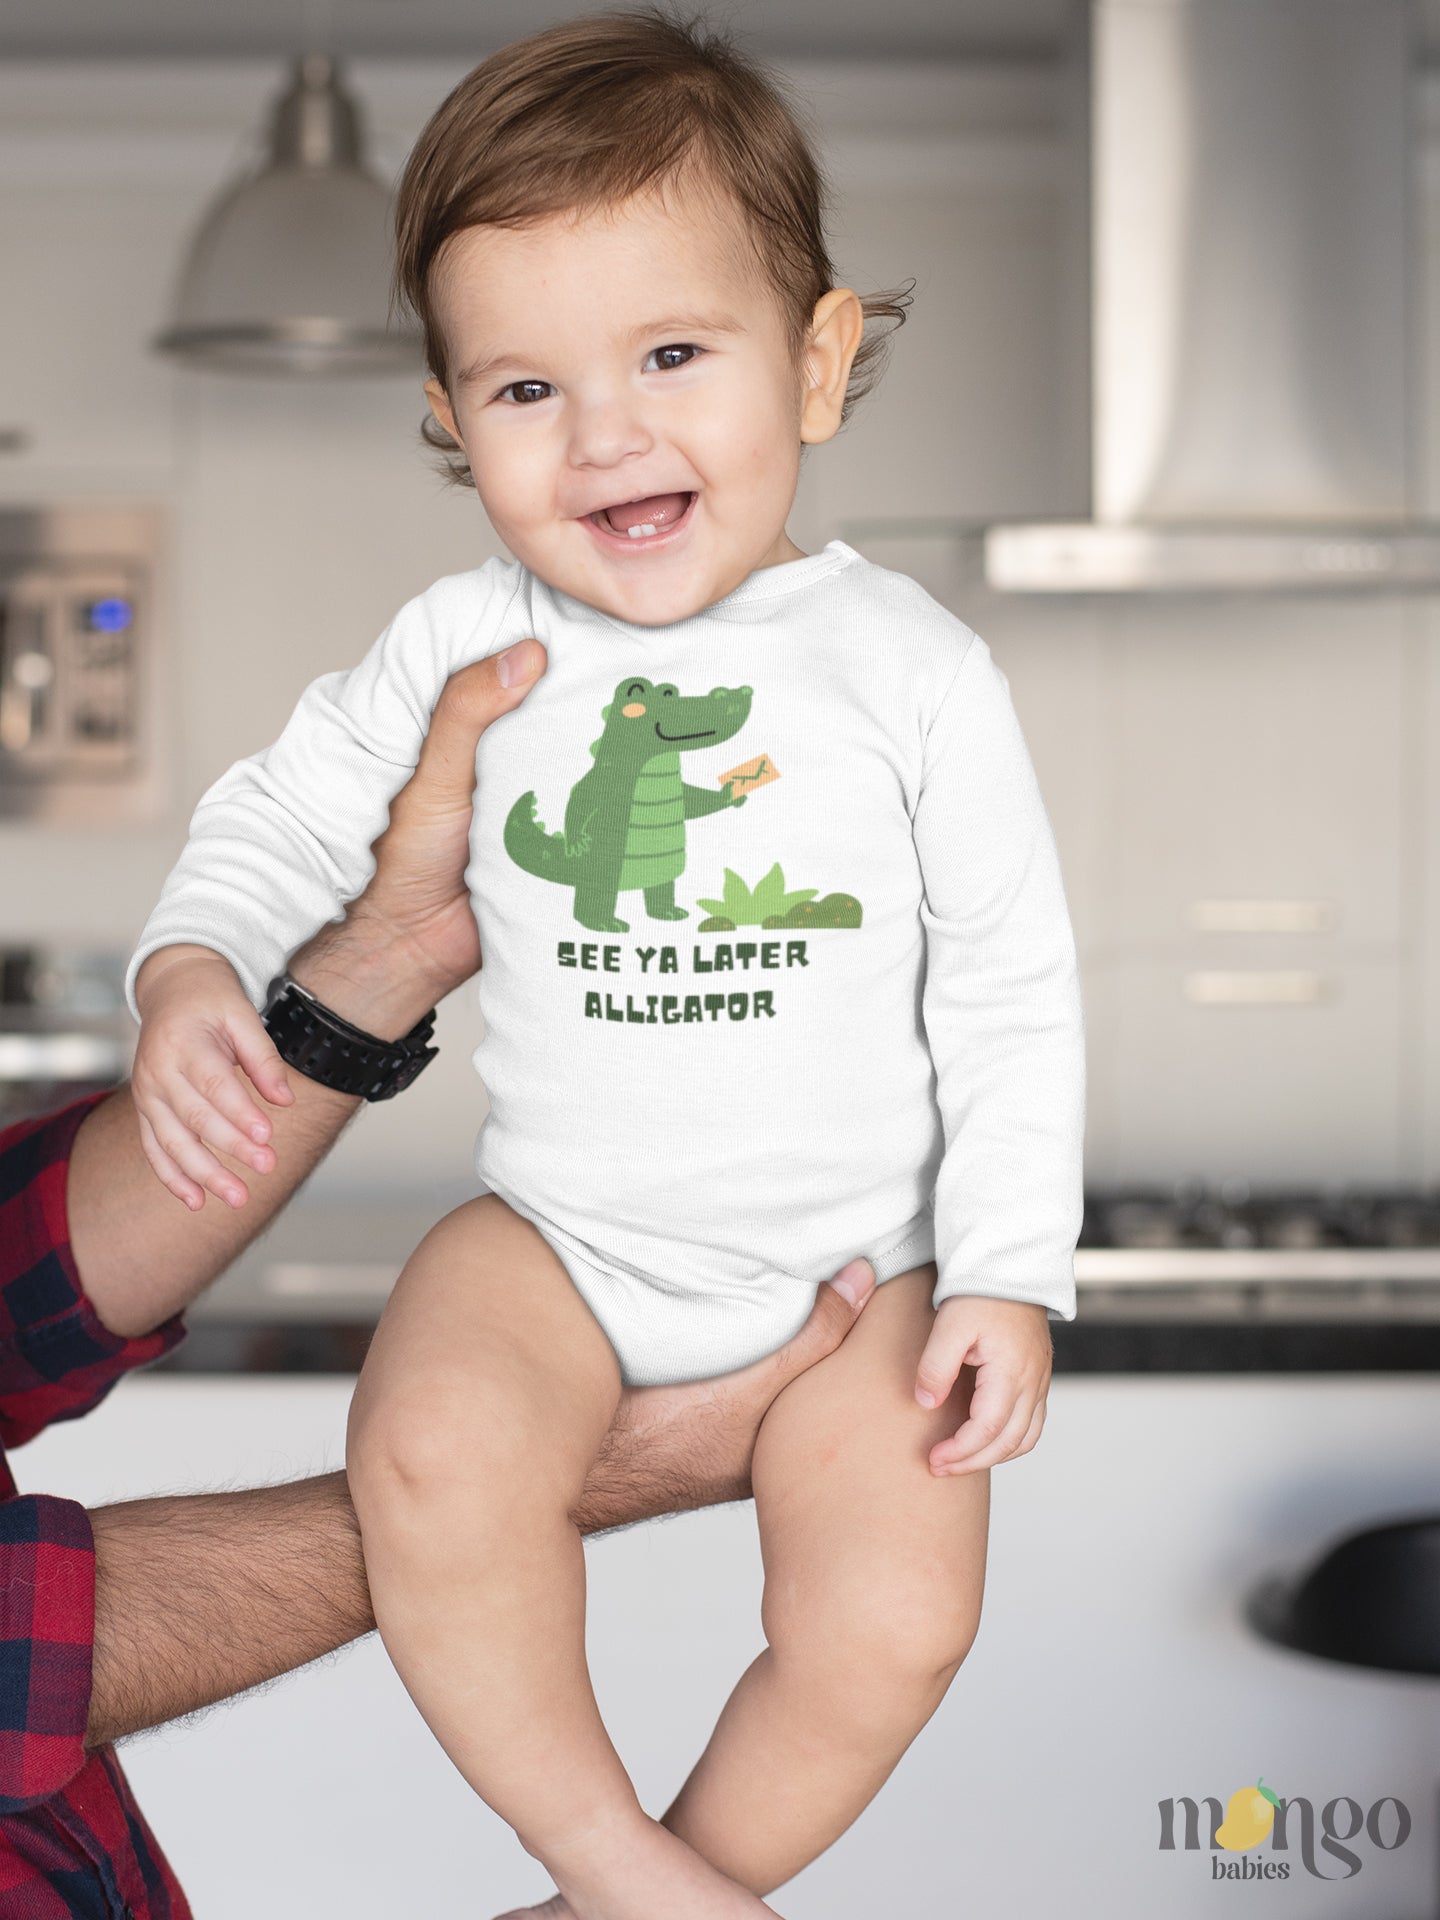 Long sleeve onesie showcasing a playful printed graphic of an alligator and the text 'See Ya Later Alligator.' Explore this delightful tee that adds a touch of whimsy and charm to your child's wardrobe.